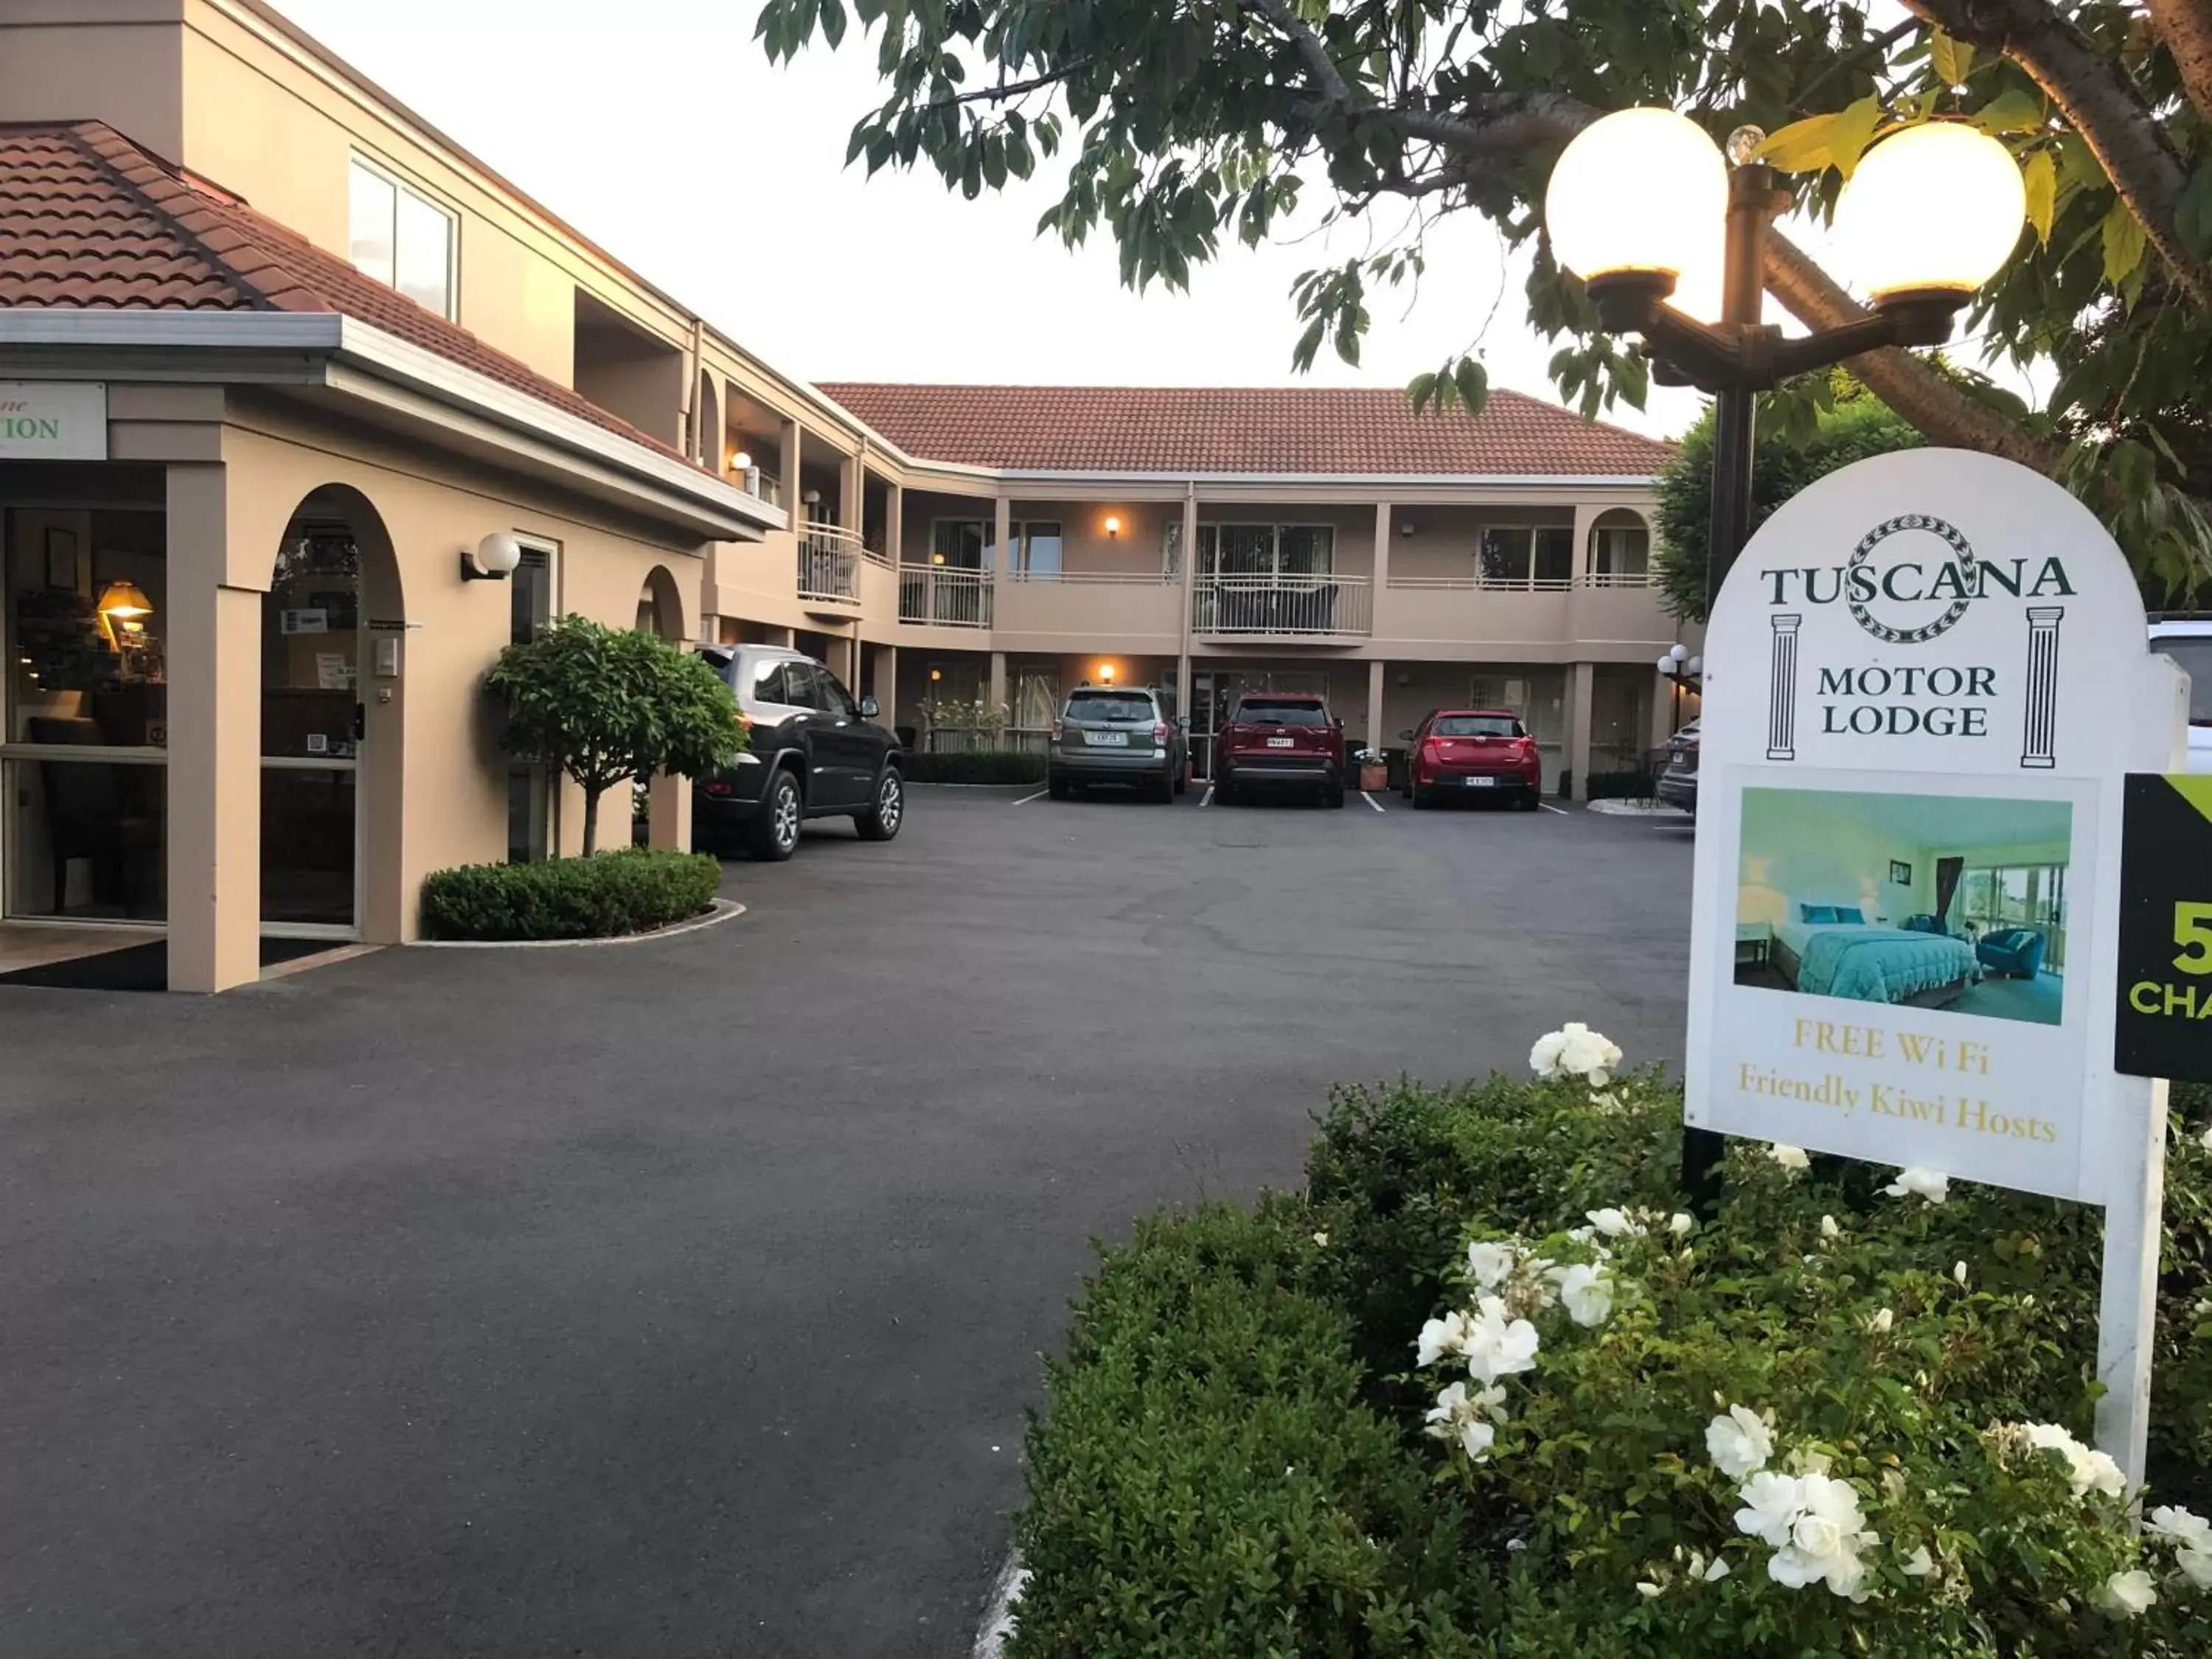 Property Building in Tuscana Motor Lodge